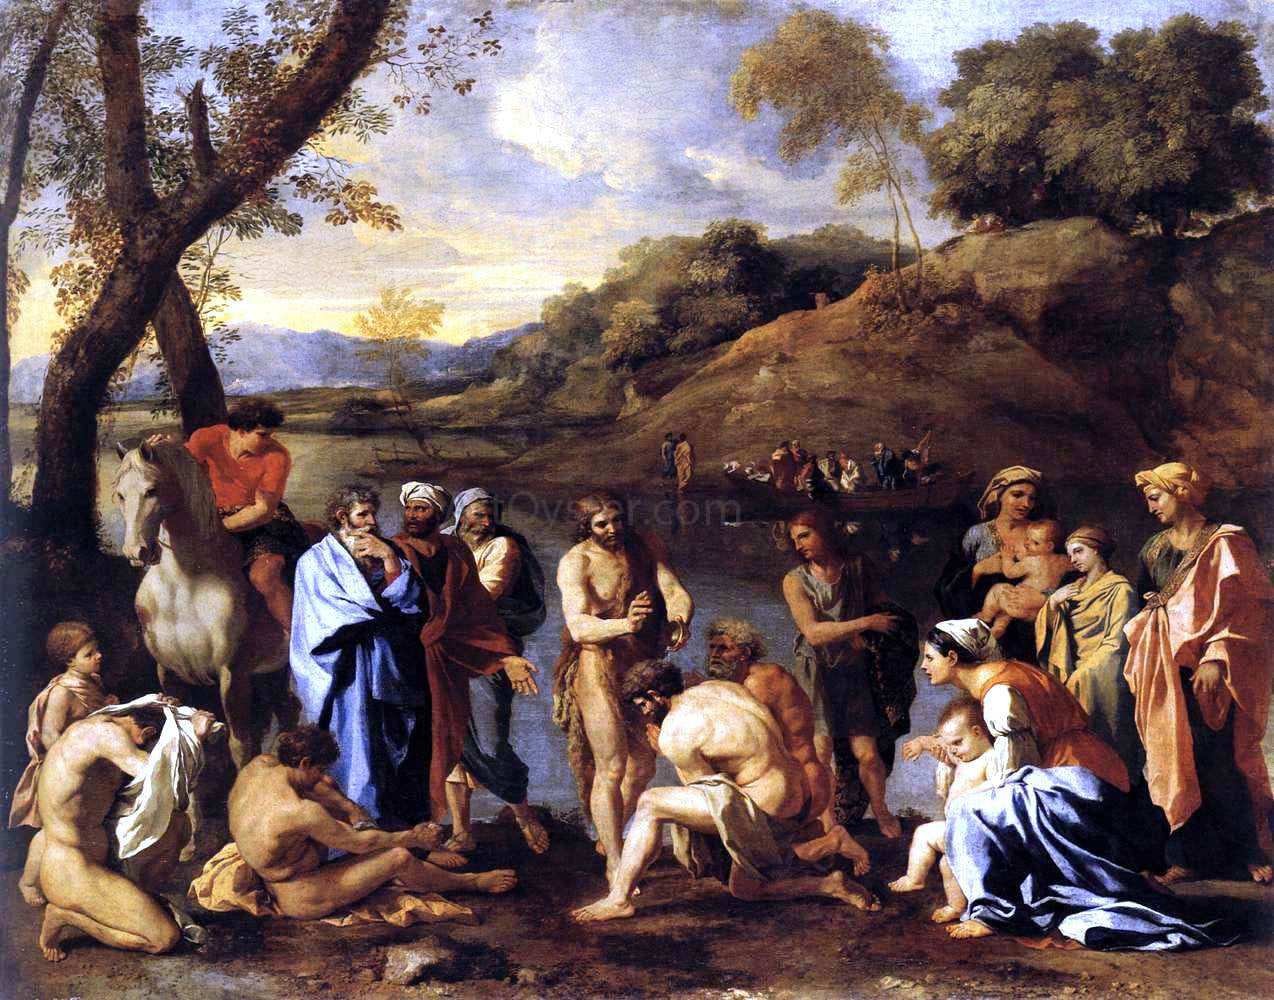  Nicolas Poussin St John the Baptist Baptizes the People - Hand Painted Oil Painting